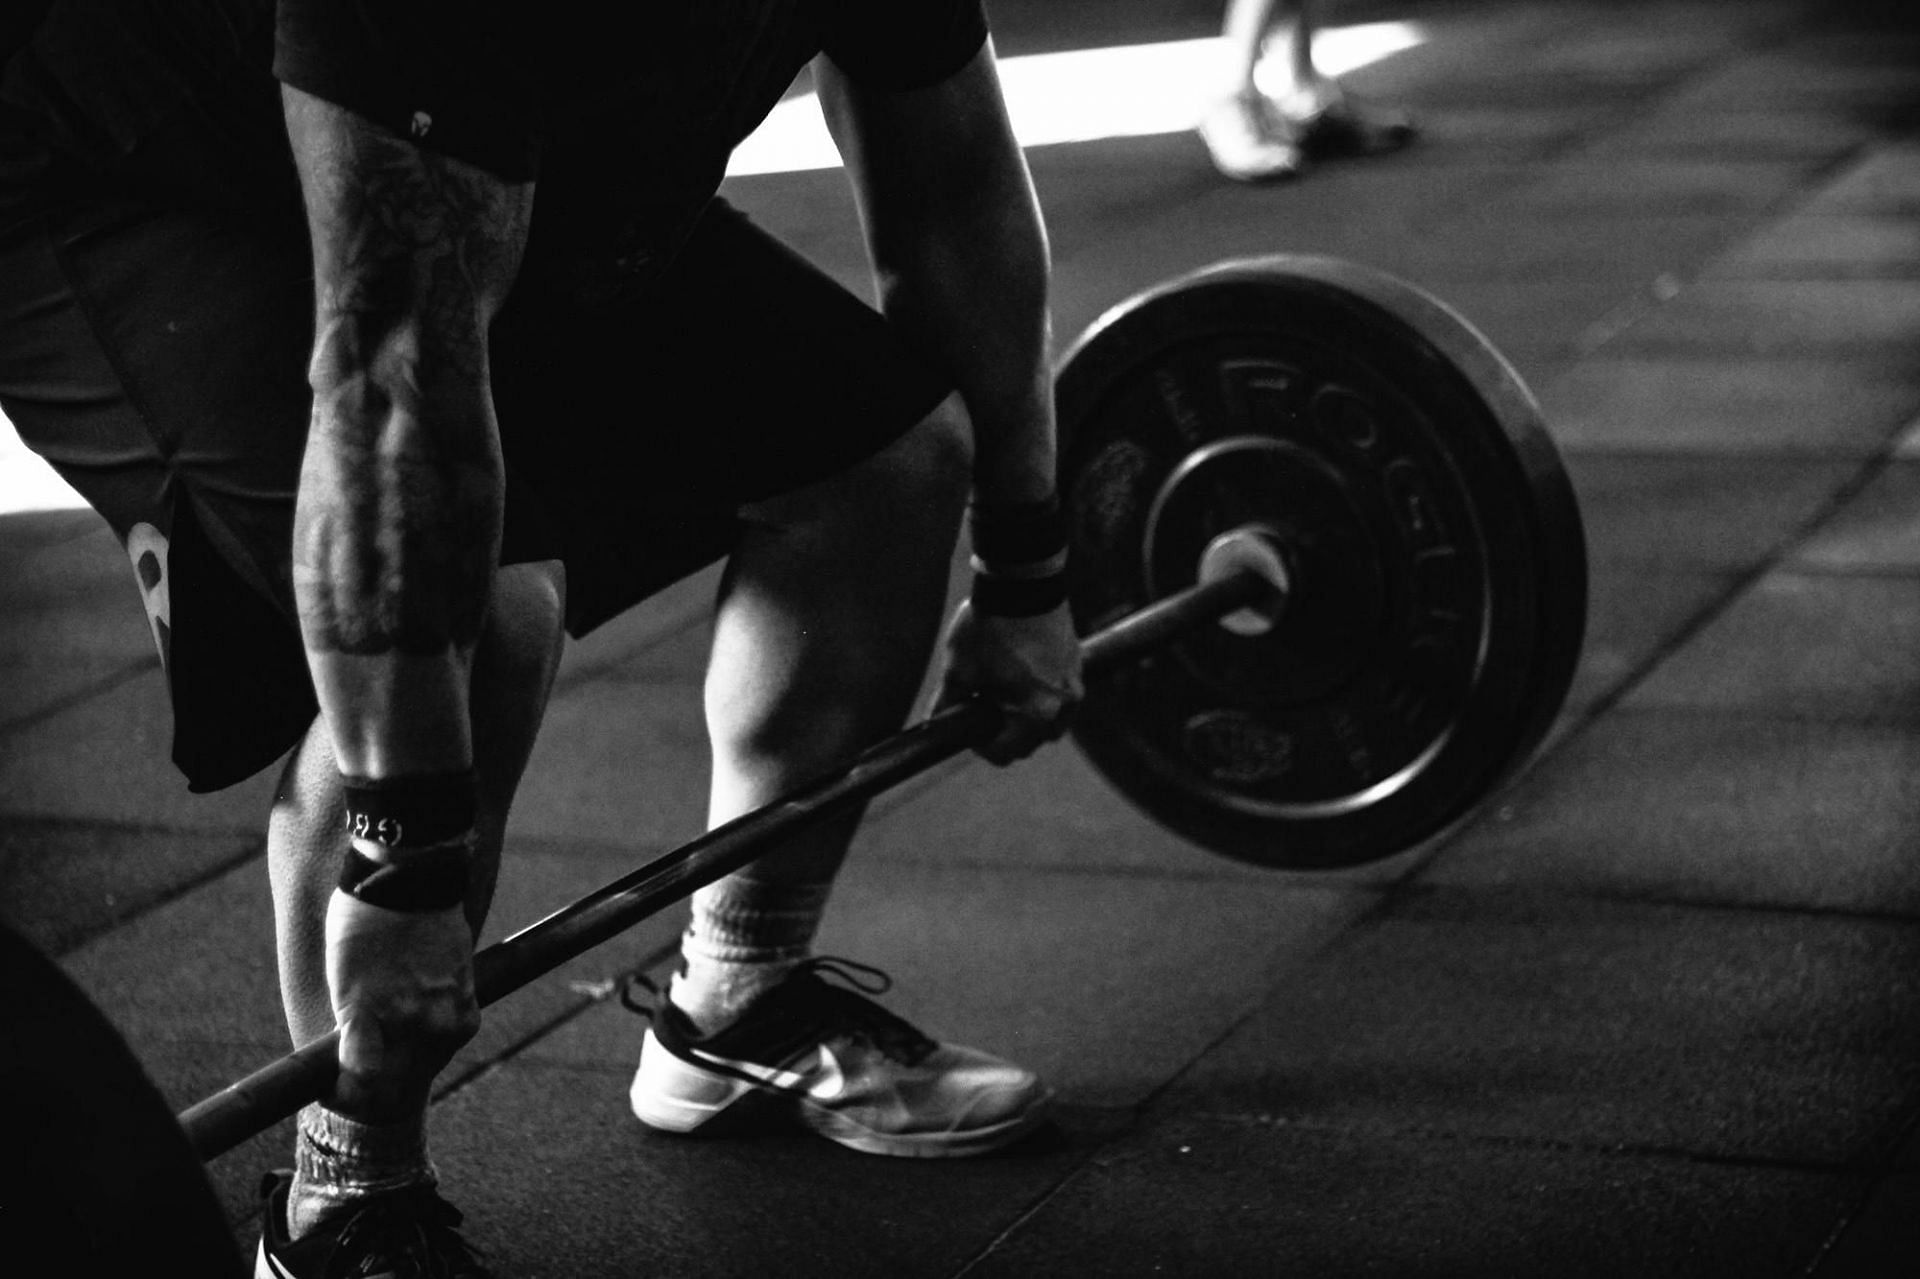 Benefits of adjusting weights (Image sourced via Pexels / Photo by victor)